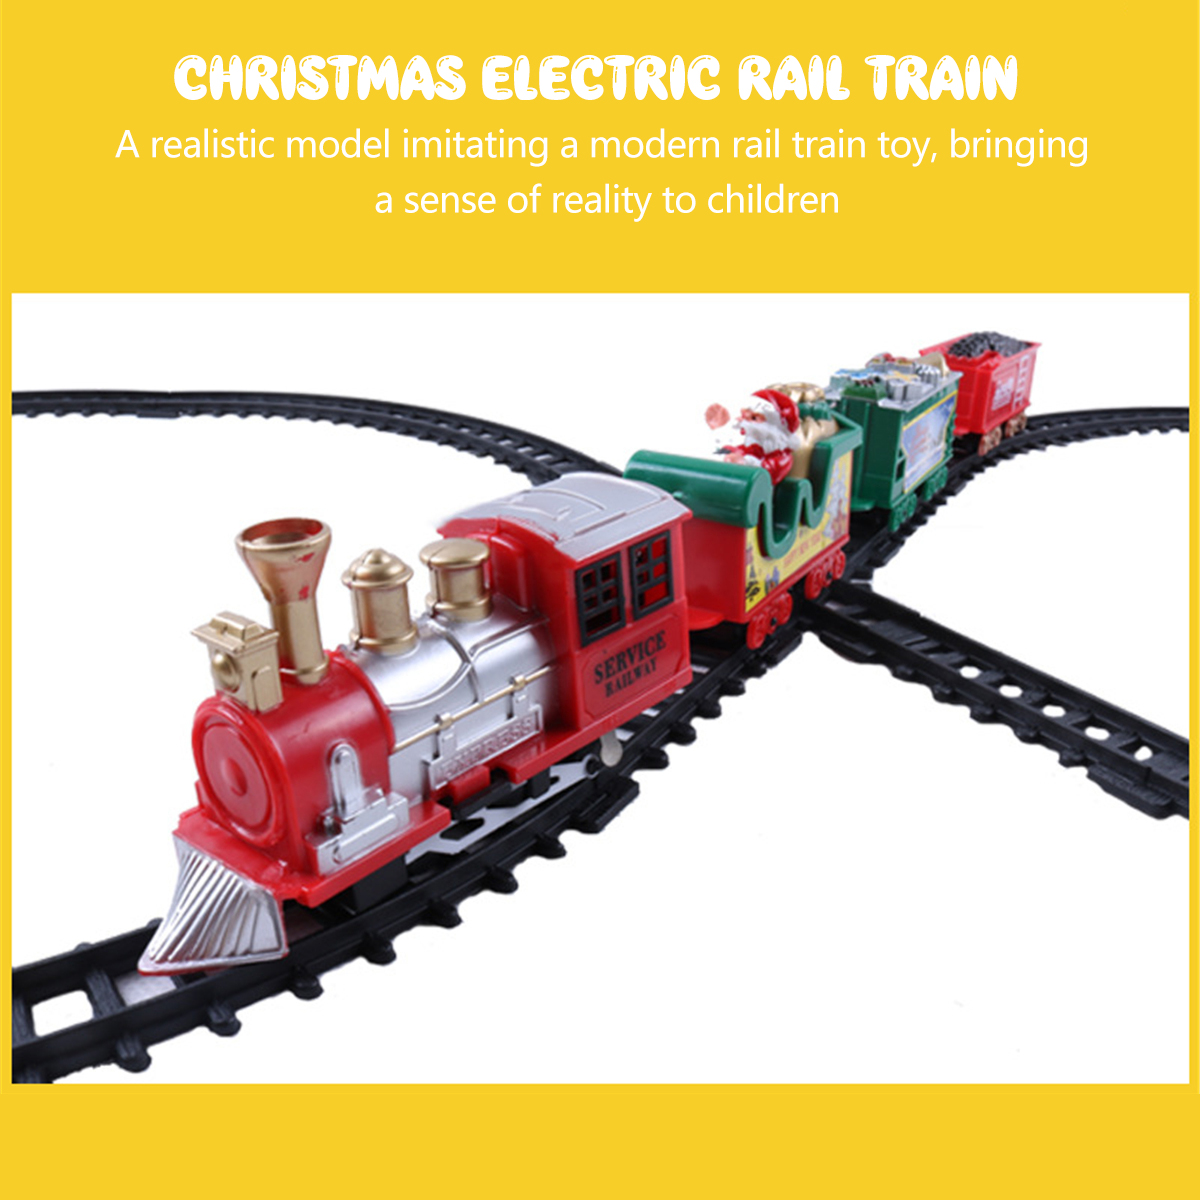 Mini-Electric-ABS-DIY-Assembly-Realistic-Front-Rail-Train-Track-Play-Fun-Model-Toy-for-Kids-Christma-1766568-3